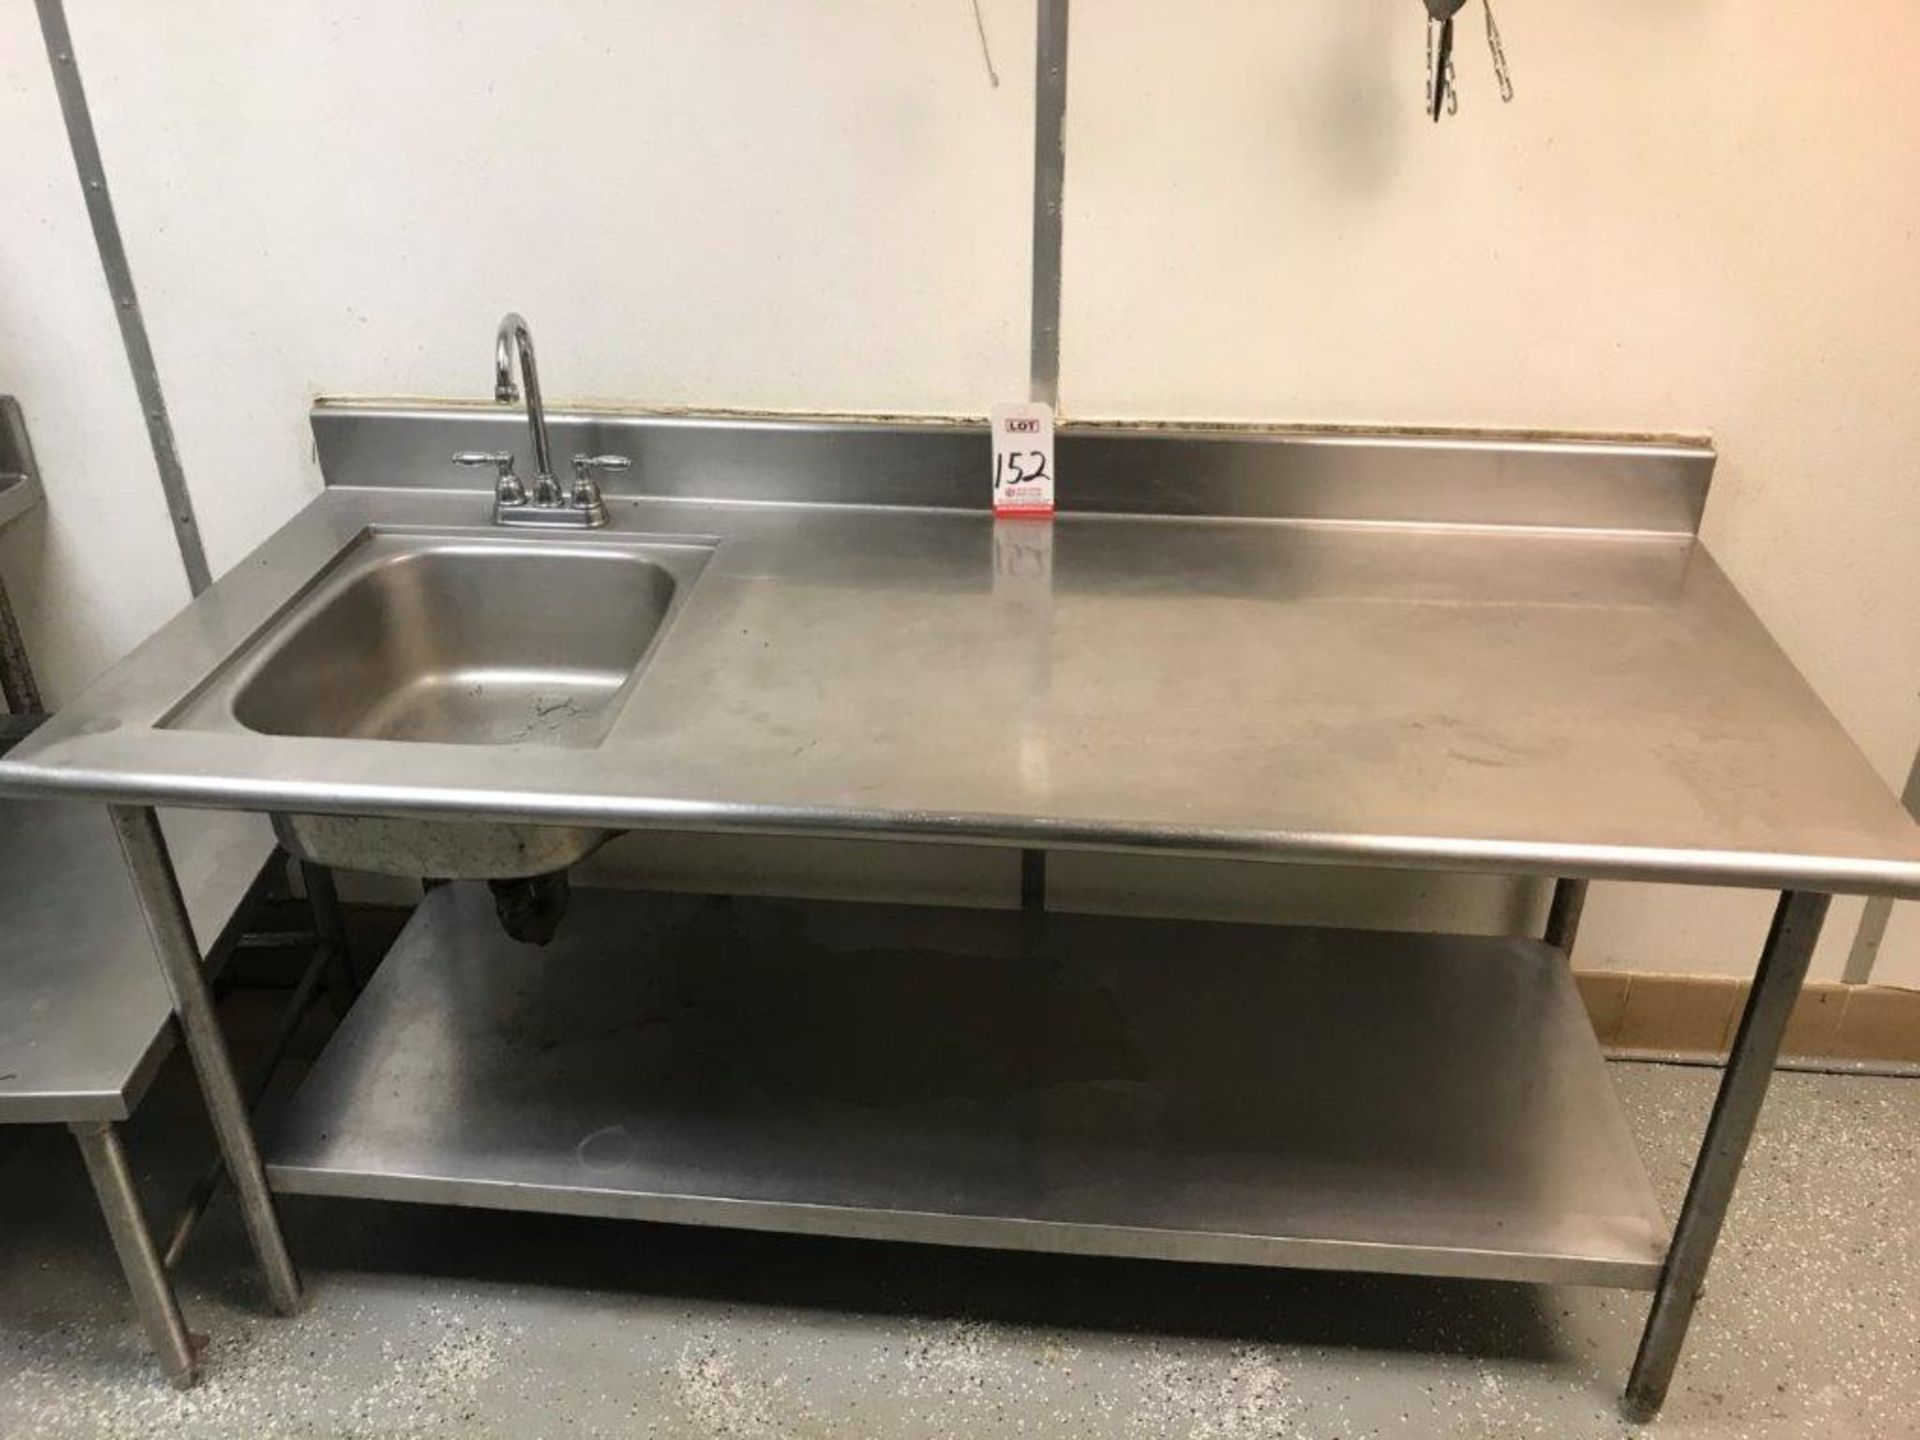 6' STAINLESS STEEL TABLE W/ SINK